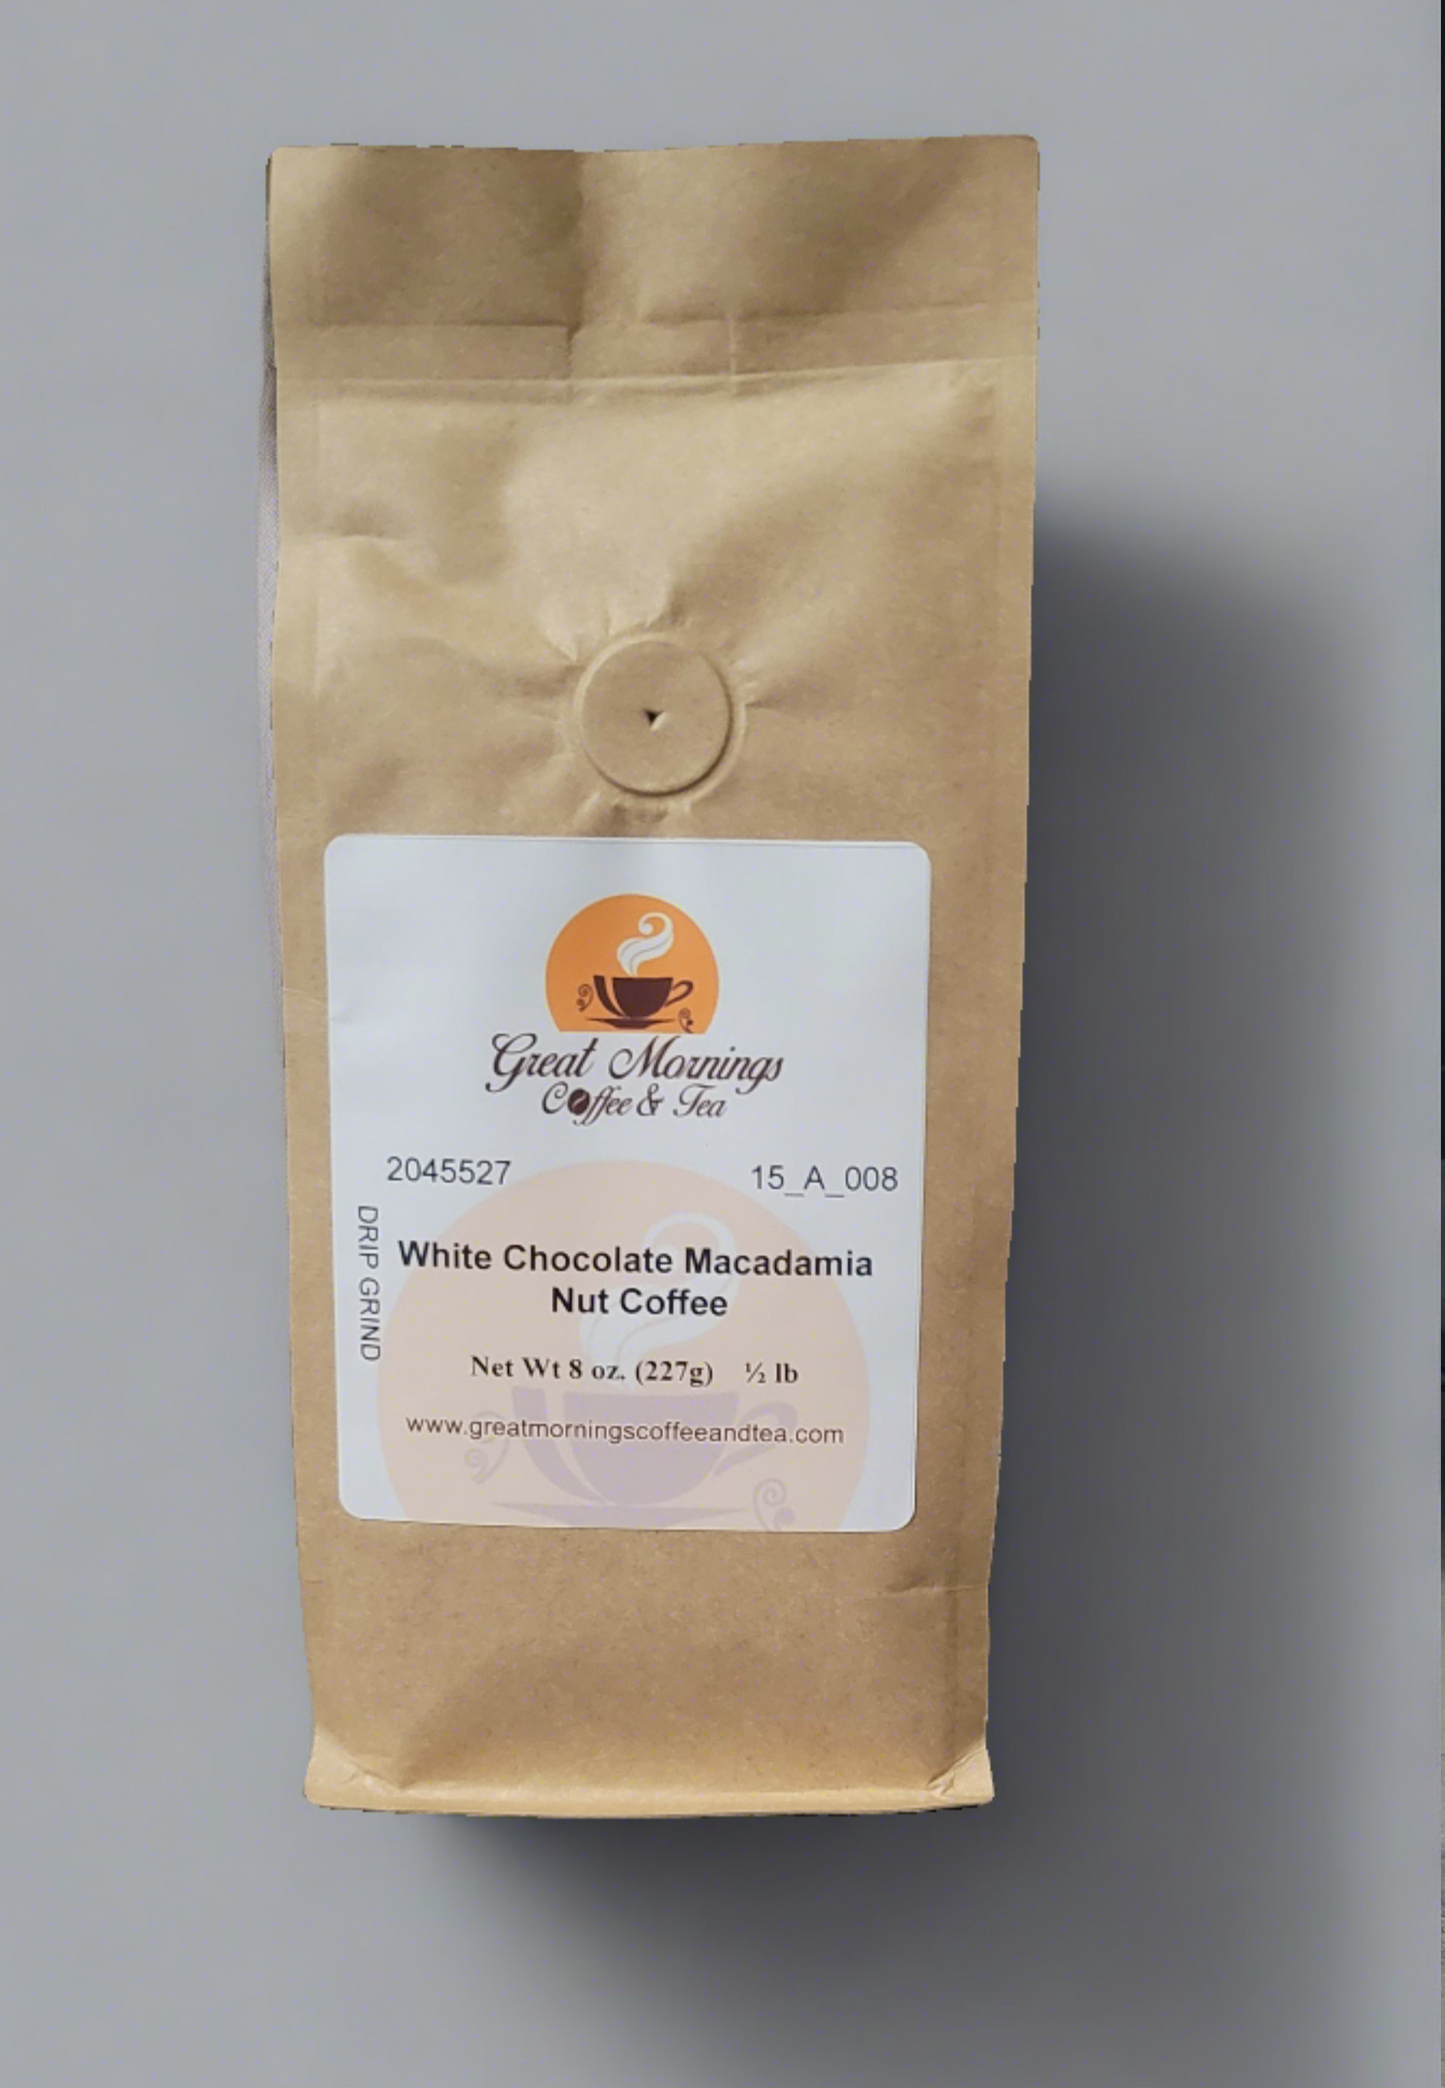 A photo of a vertical brown paper coffee bag on a gray background. The bag has a white label with the logo "Great Mornings Coffee & Tea," featuring a stylized orange coffee cup with steam. Text on the label includes a product code "2045527 15_A_008," the flavor "White Chocolate Macadamia Nut Coffee," and details "Net Wt 8 oz. (227g) ½ lb." Below is the website "www.greatmorningscoffeeandtea.com.